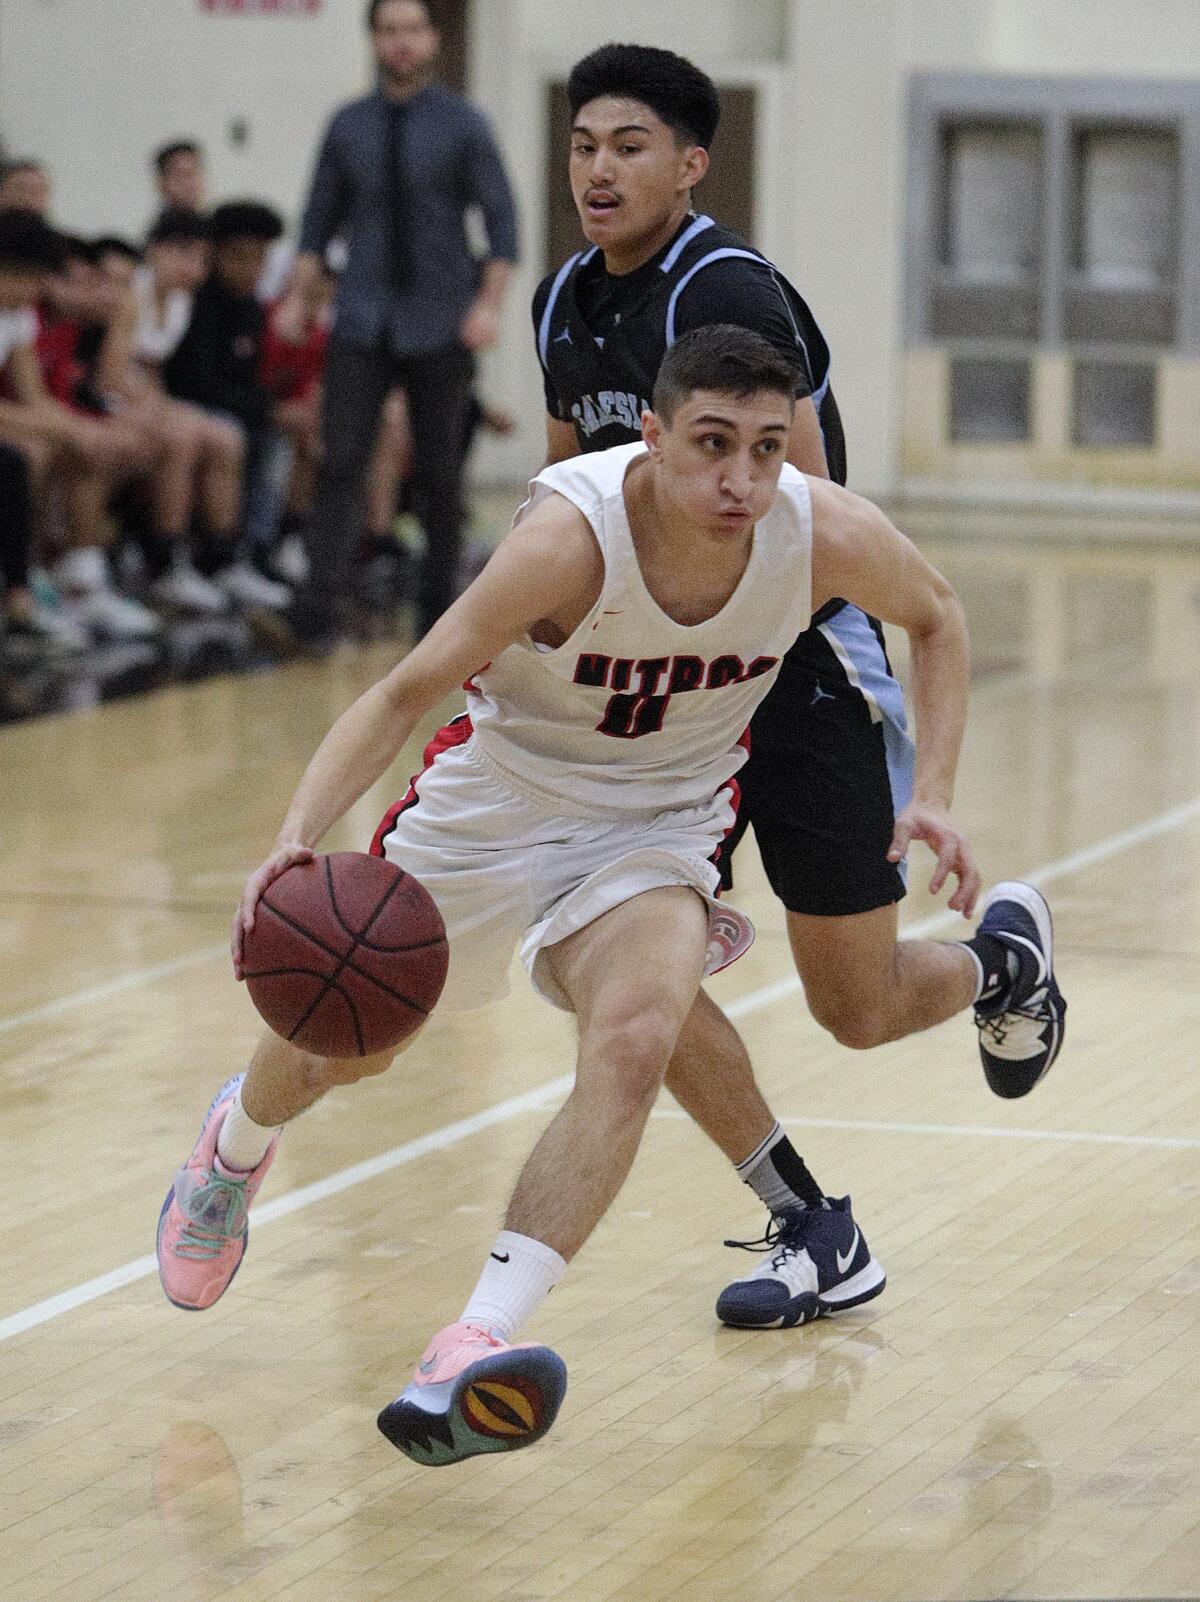 Glendale High boys' basketball player Manny Kapoushian drives to the basket against Salesian in a CIF Southern Section Division III-AA second-round playoff game Friday at Glendale. Glendale fell, 55-49, in overtime.